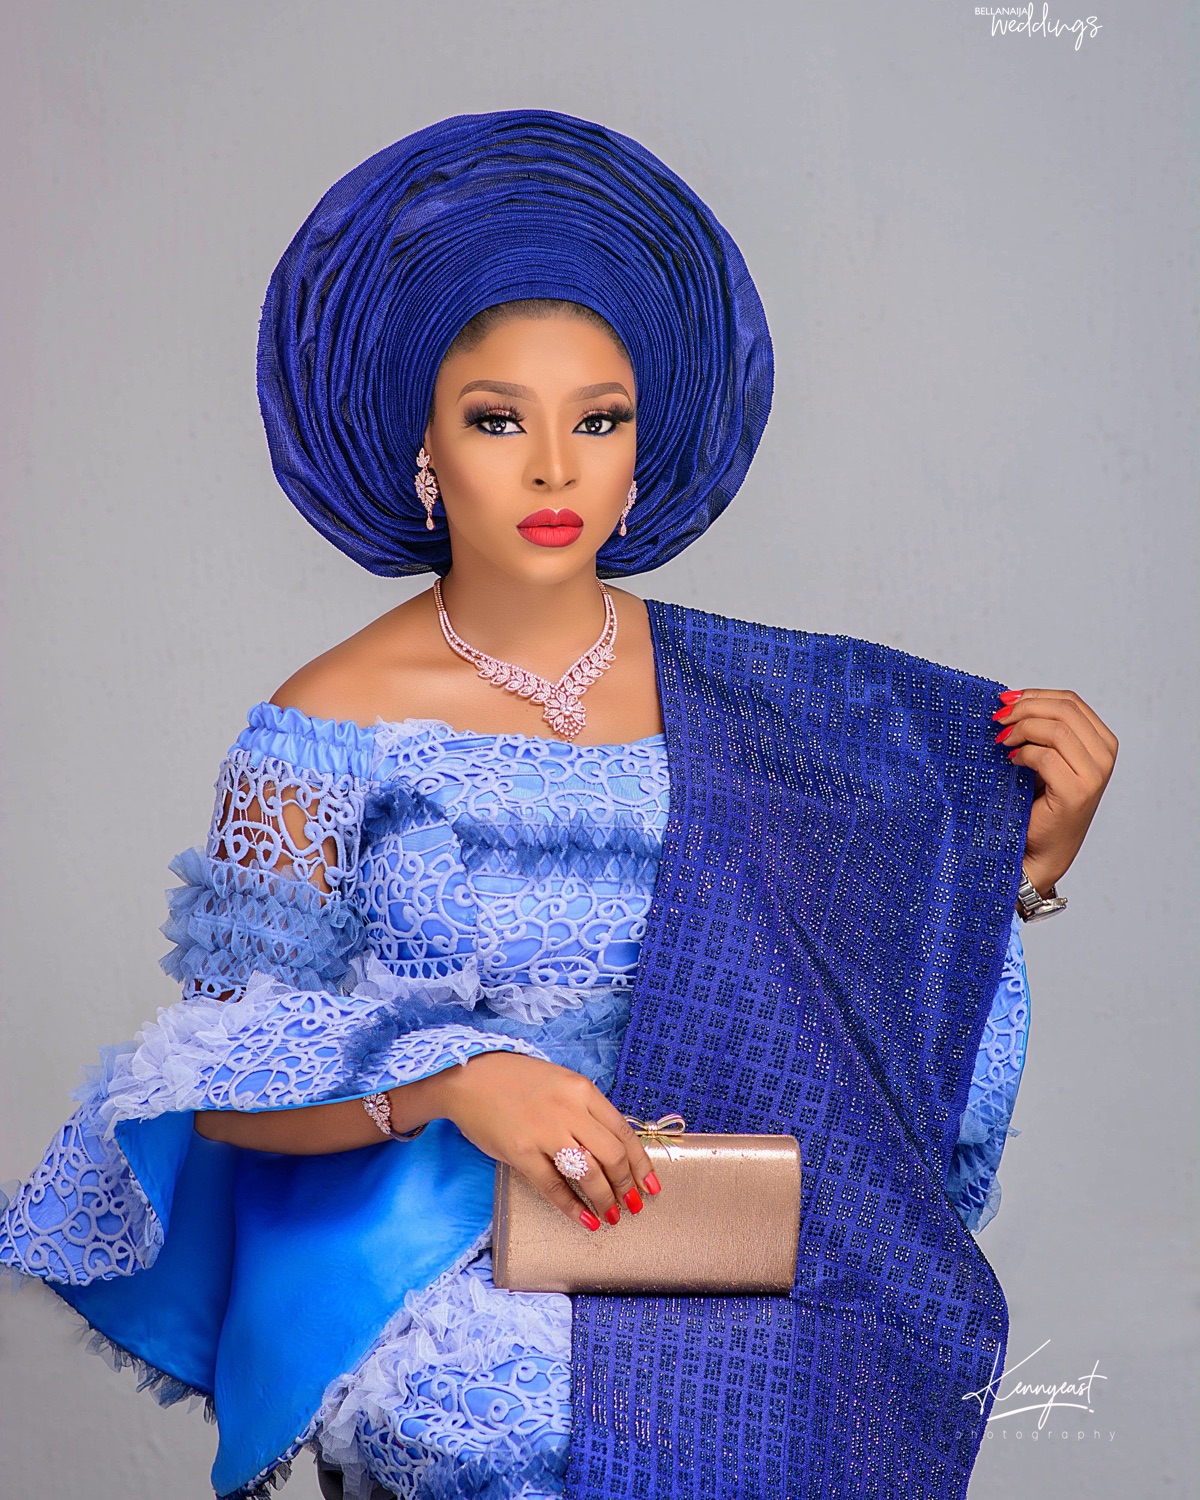 Here's how to make a Statement in Blue for your Traditional Engagement